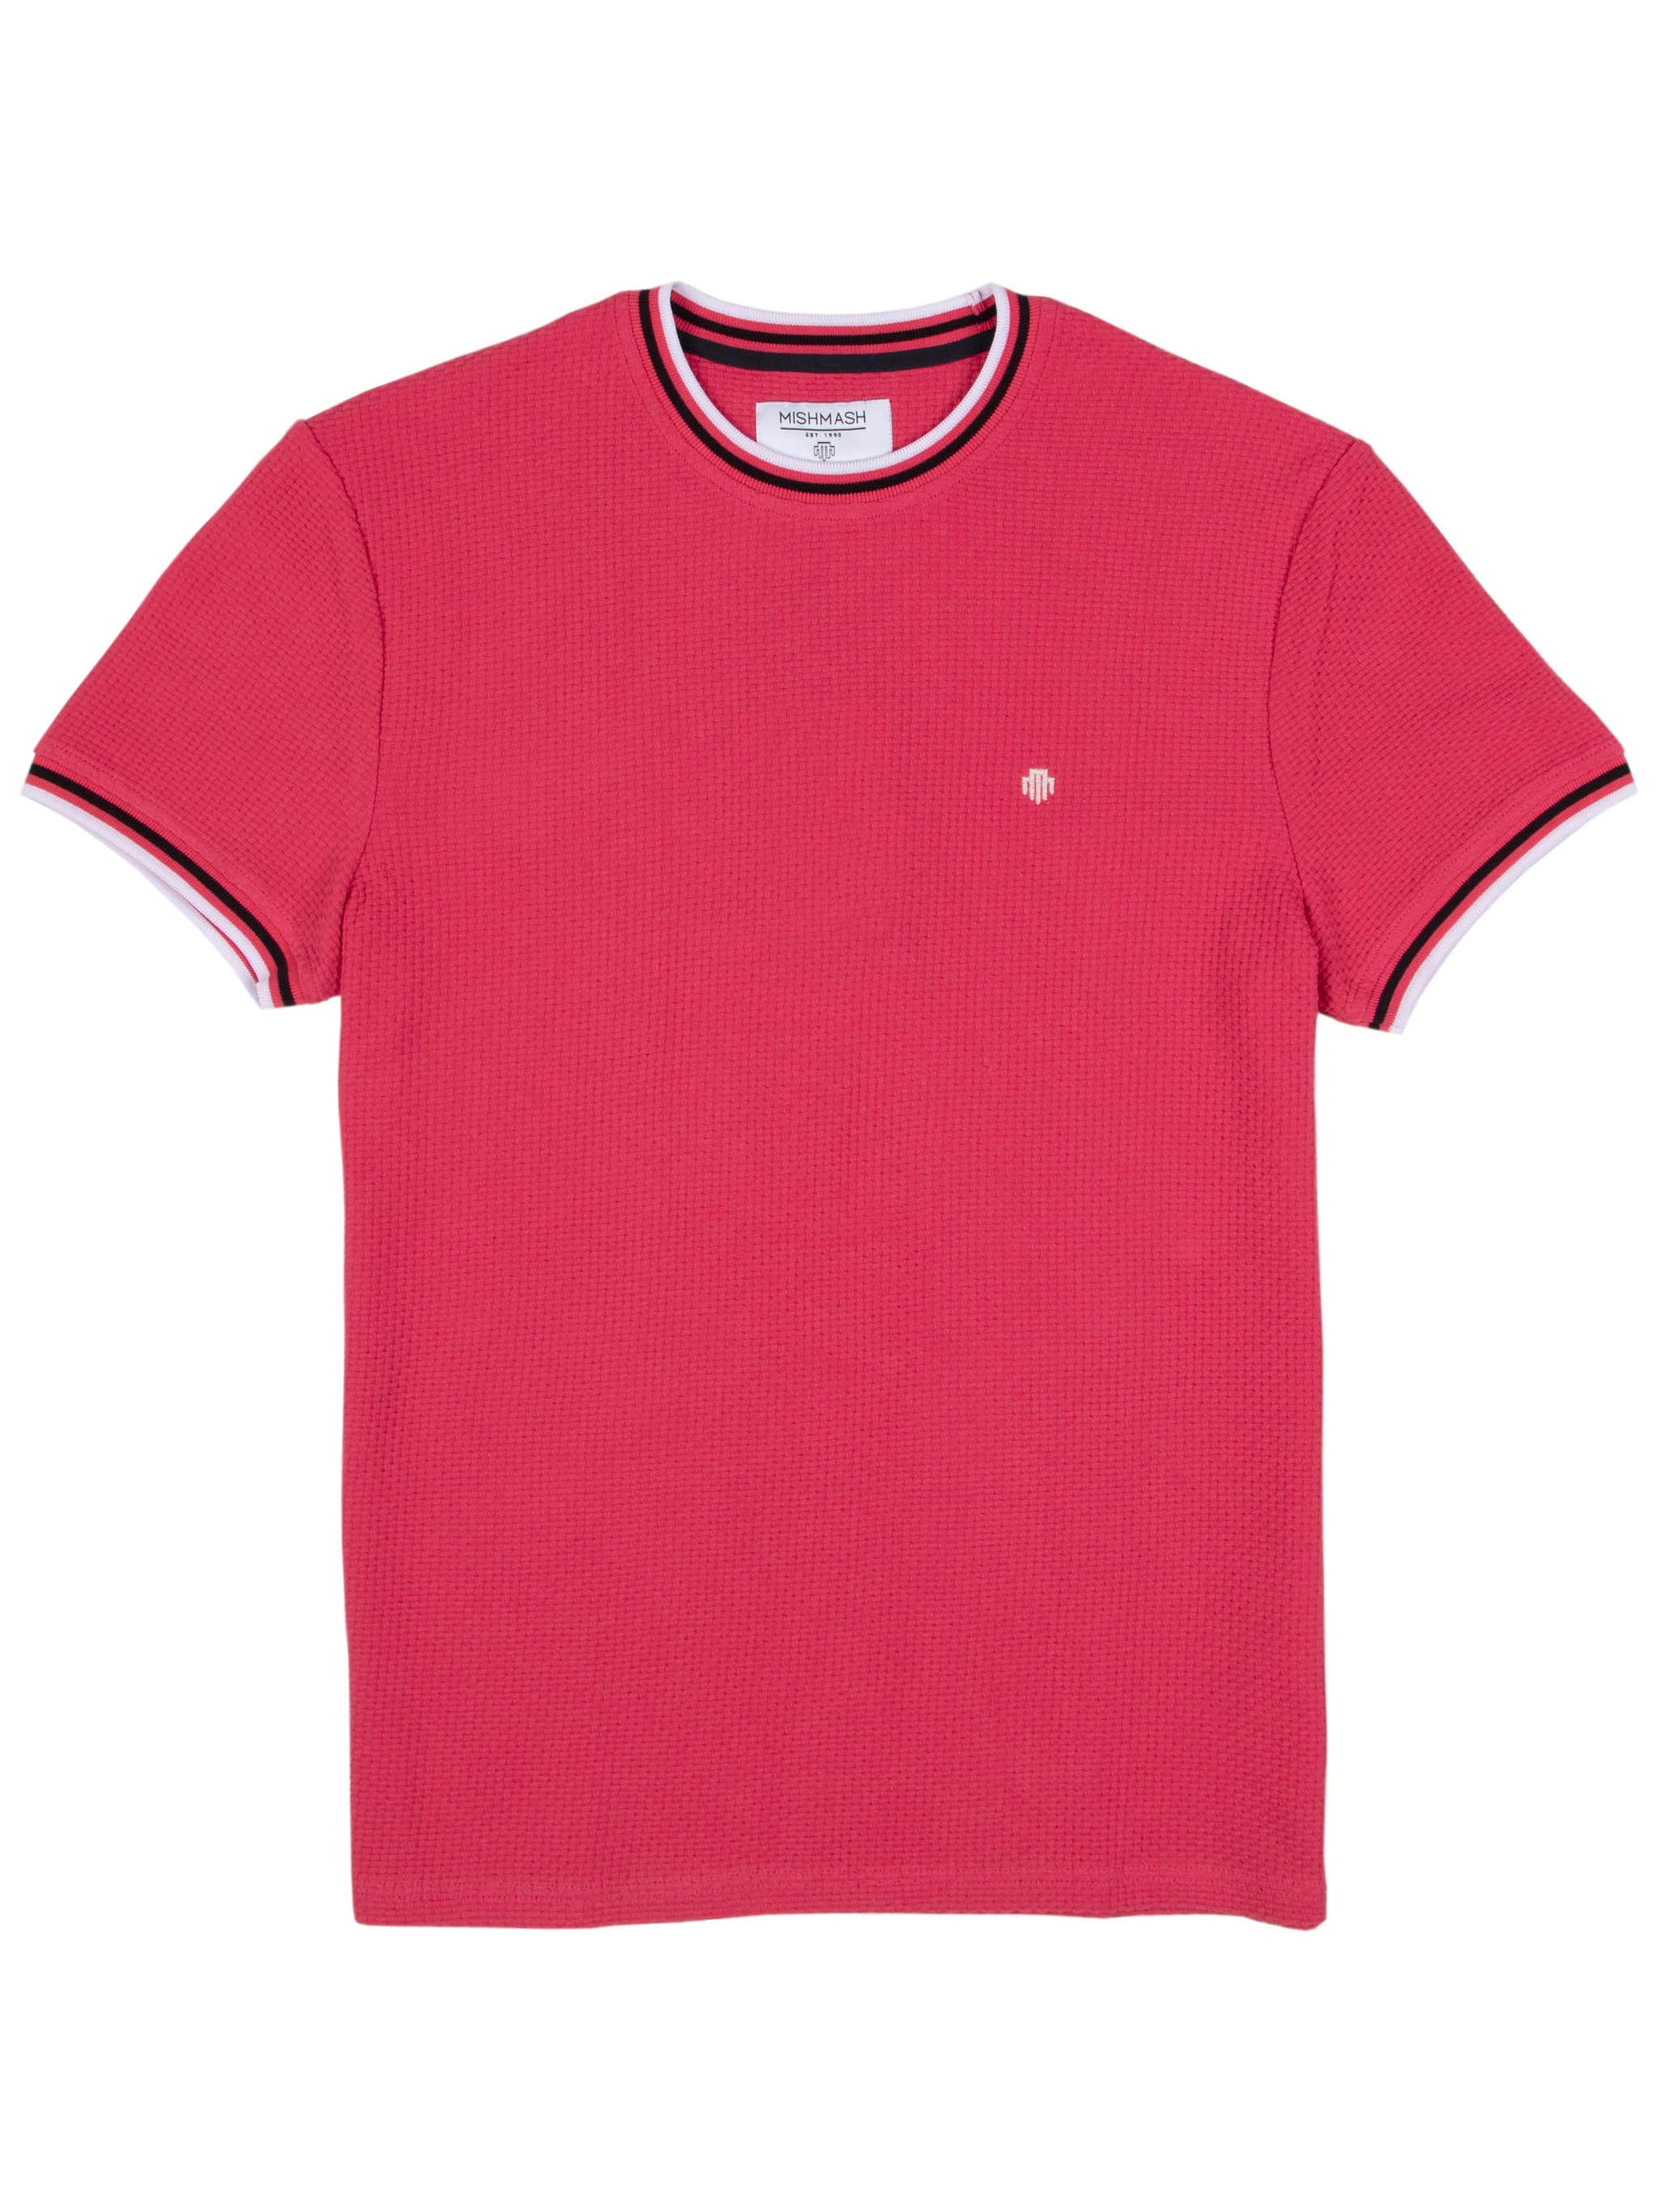 Regular Fit Textured Cotton Jersey Stockholm Pale Red T-Shirt